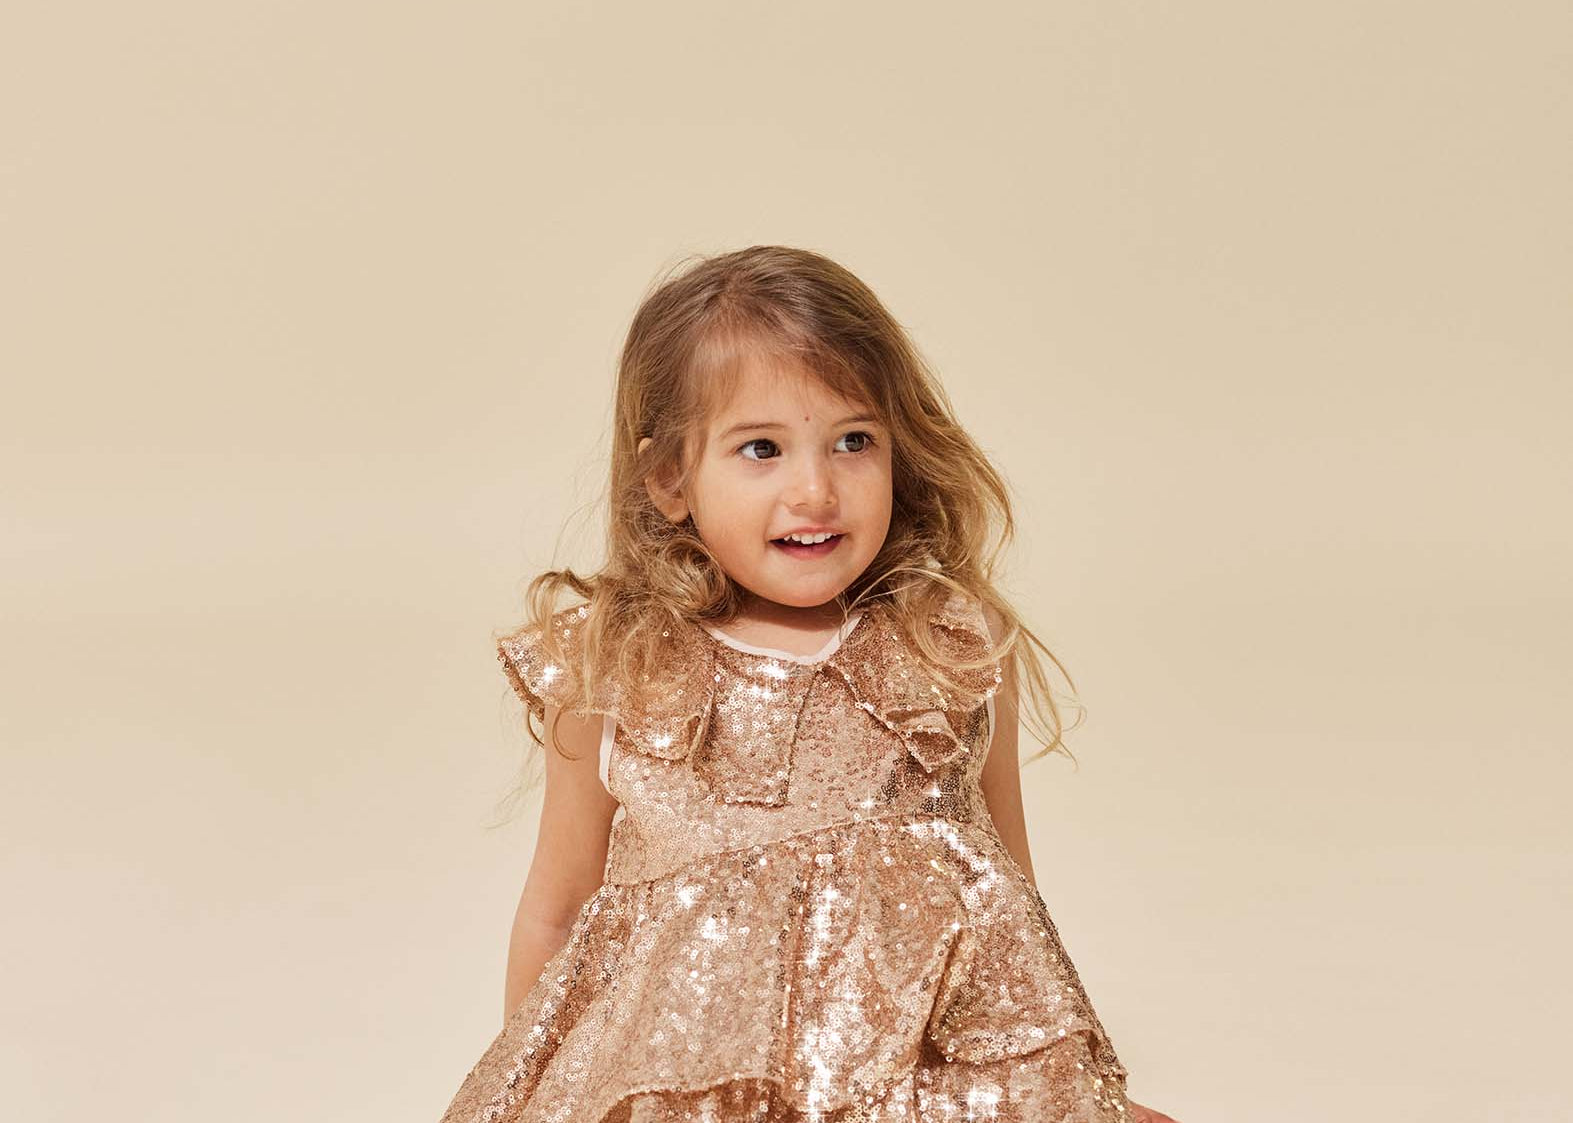 Konges Sløjd A/S STARLA SEQUIN DRESS Dresses and skirts - Woven GOLD BLUSH